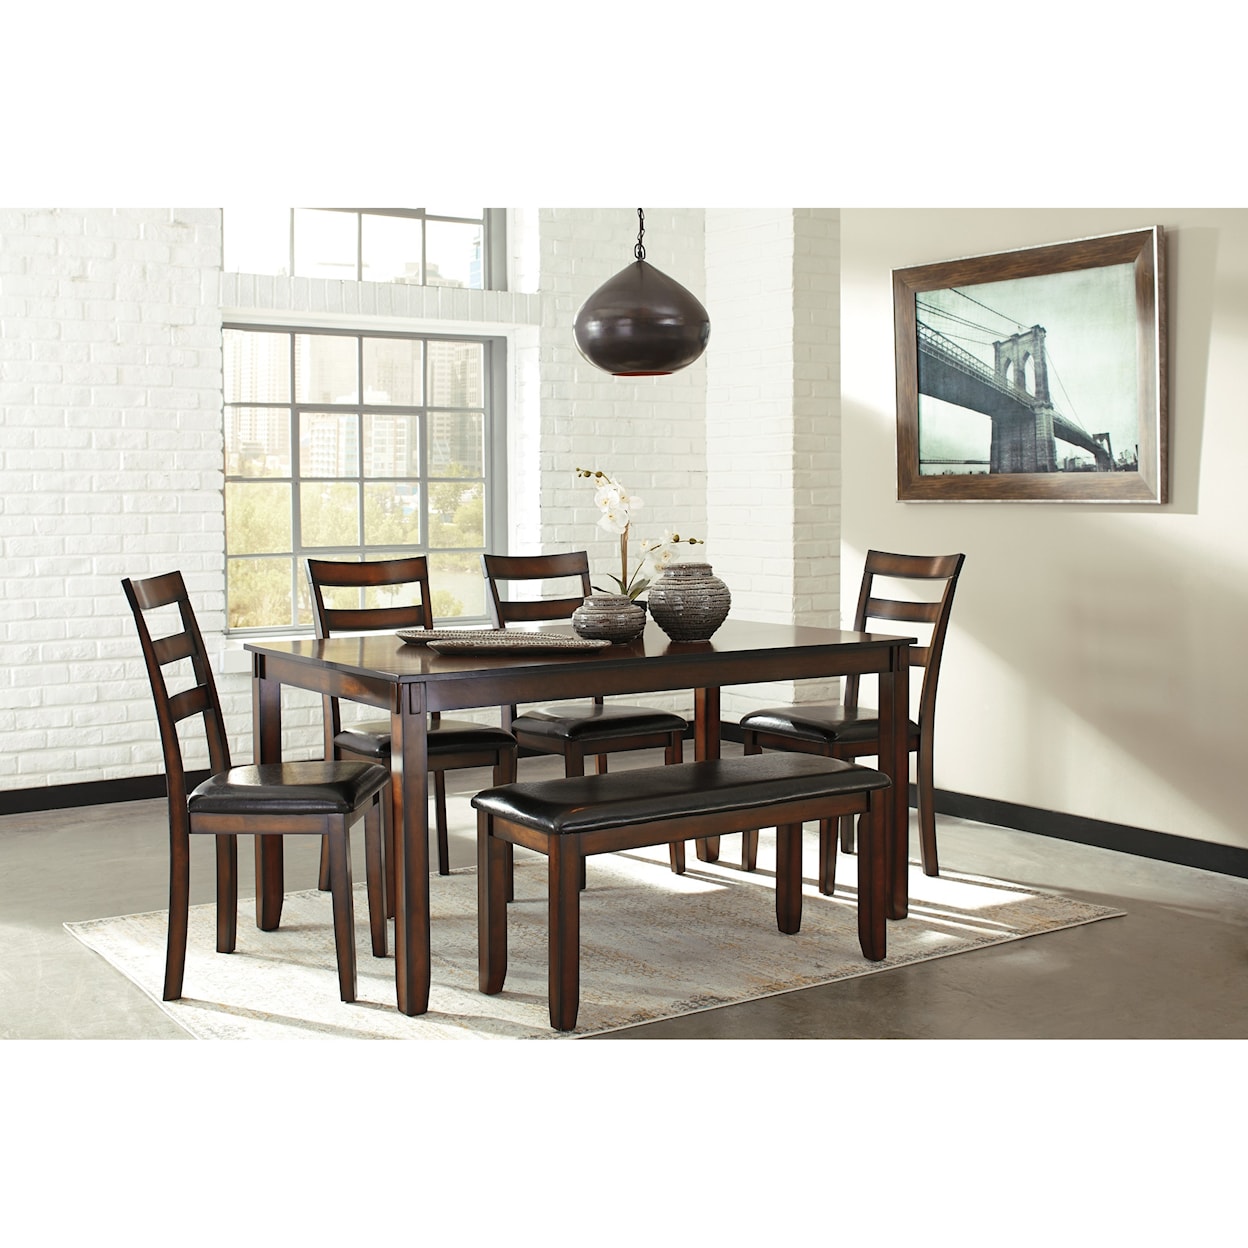 Signature Design by Ashley Coviar 6-Piece Dining Room Table Set